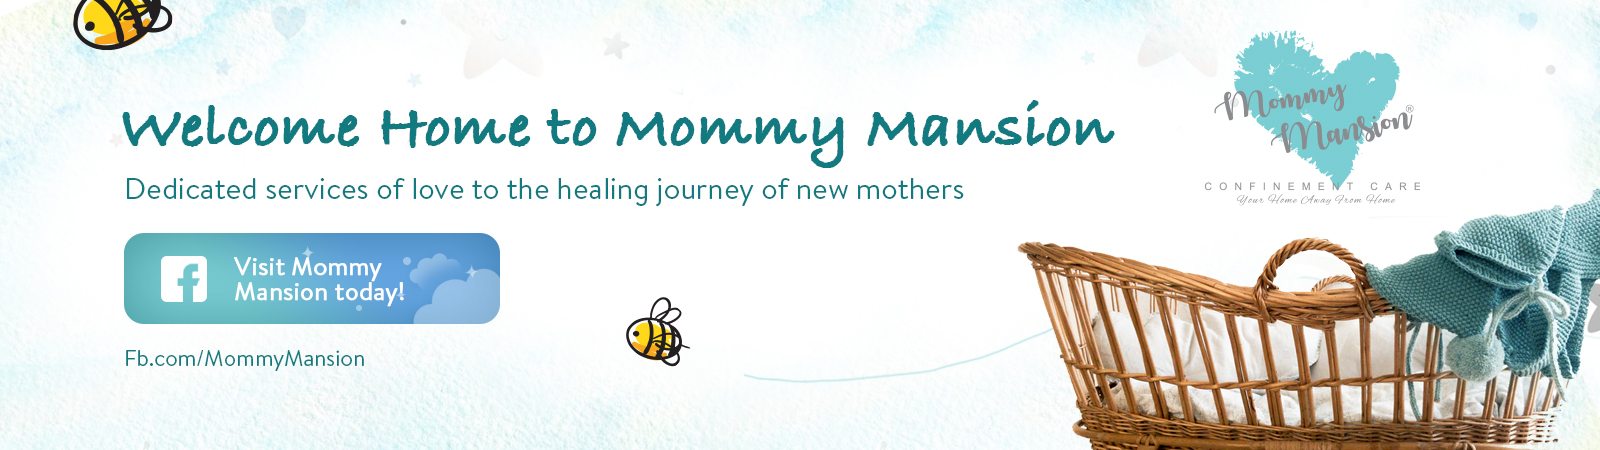 Mommy Mansion Confinement Centre: Where a New Mom’s Wishes Come True